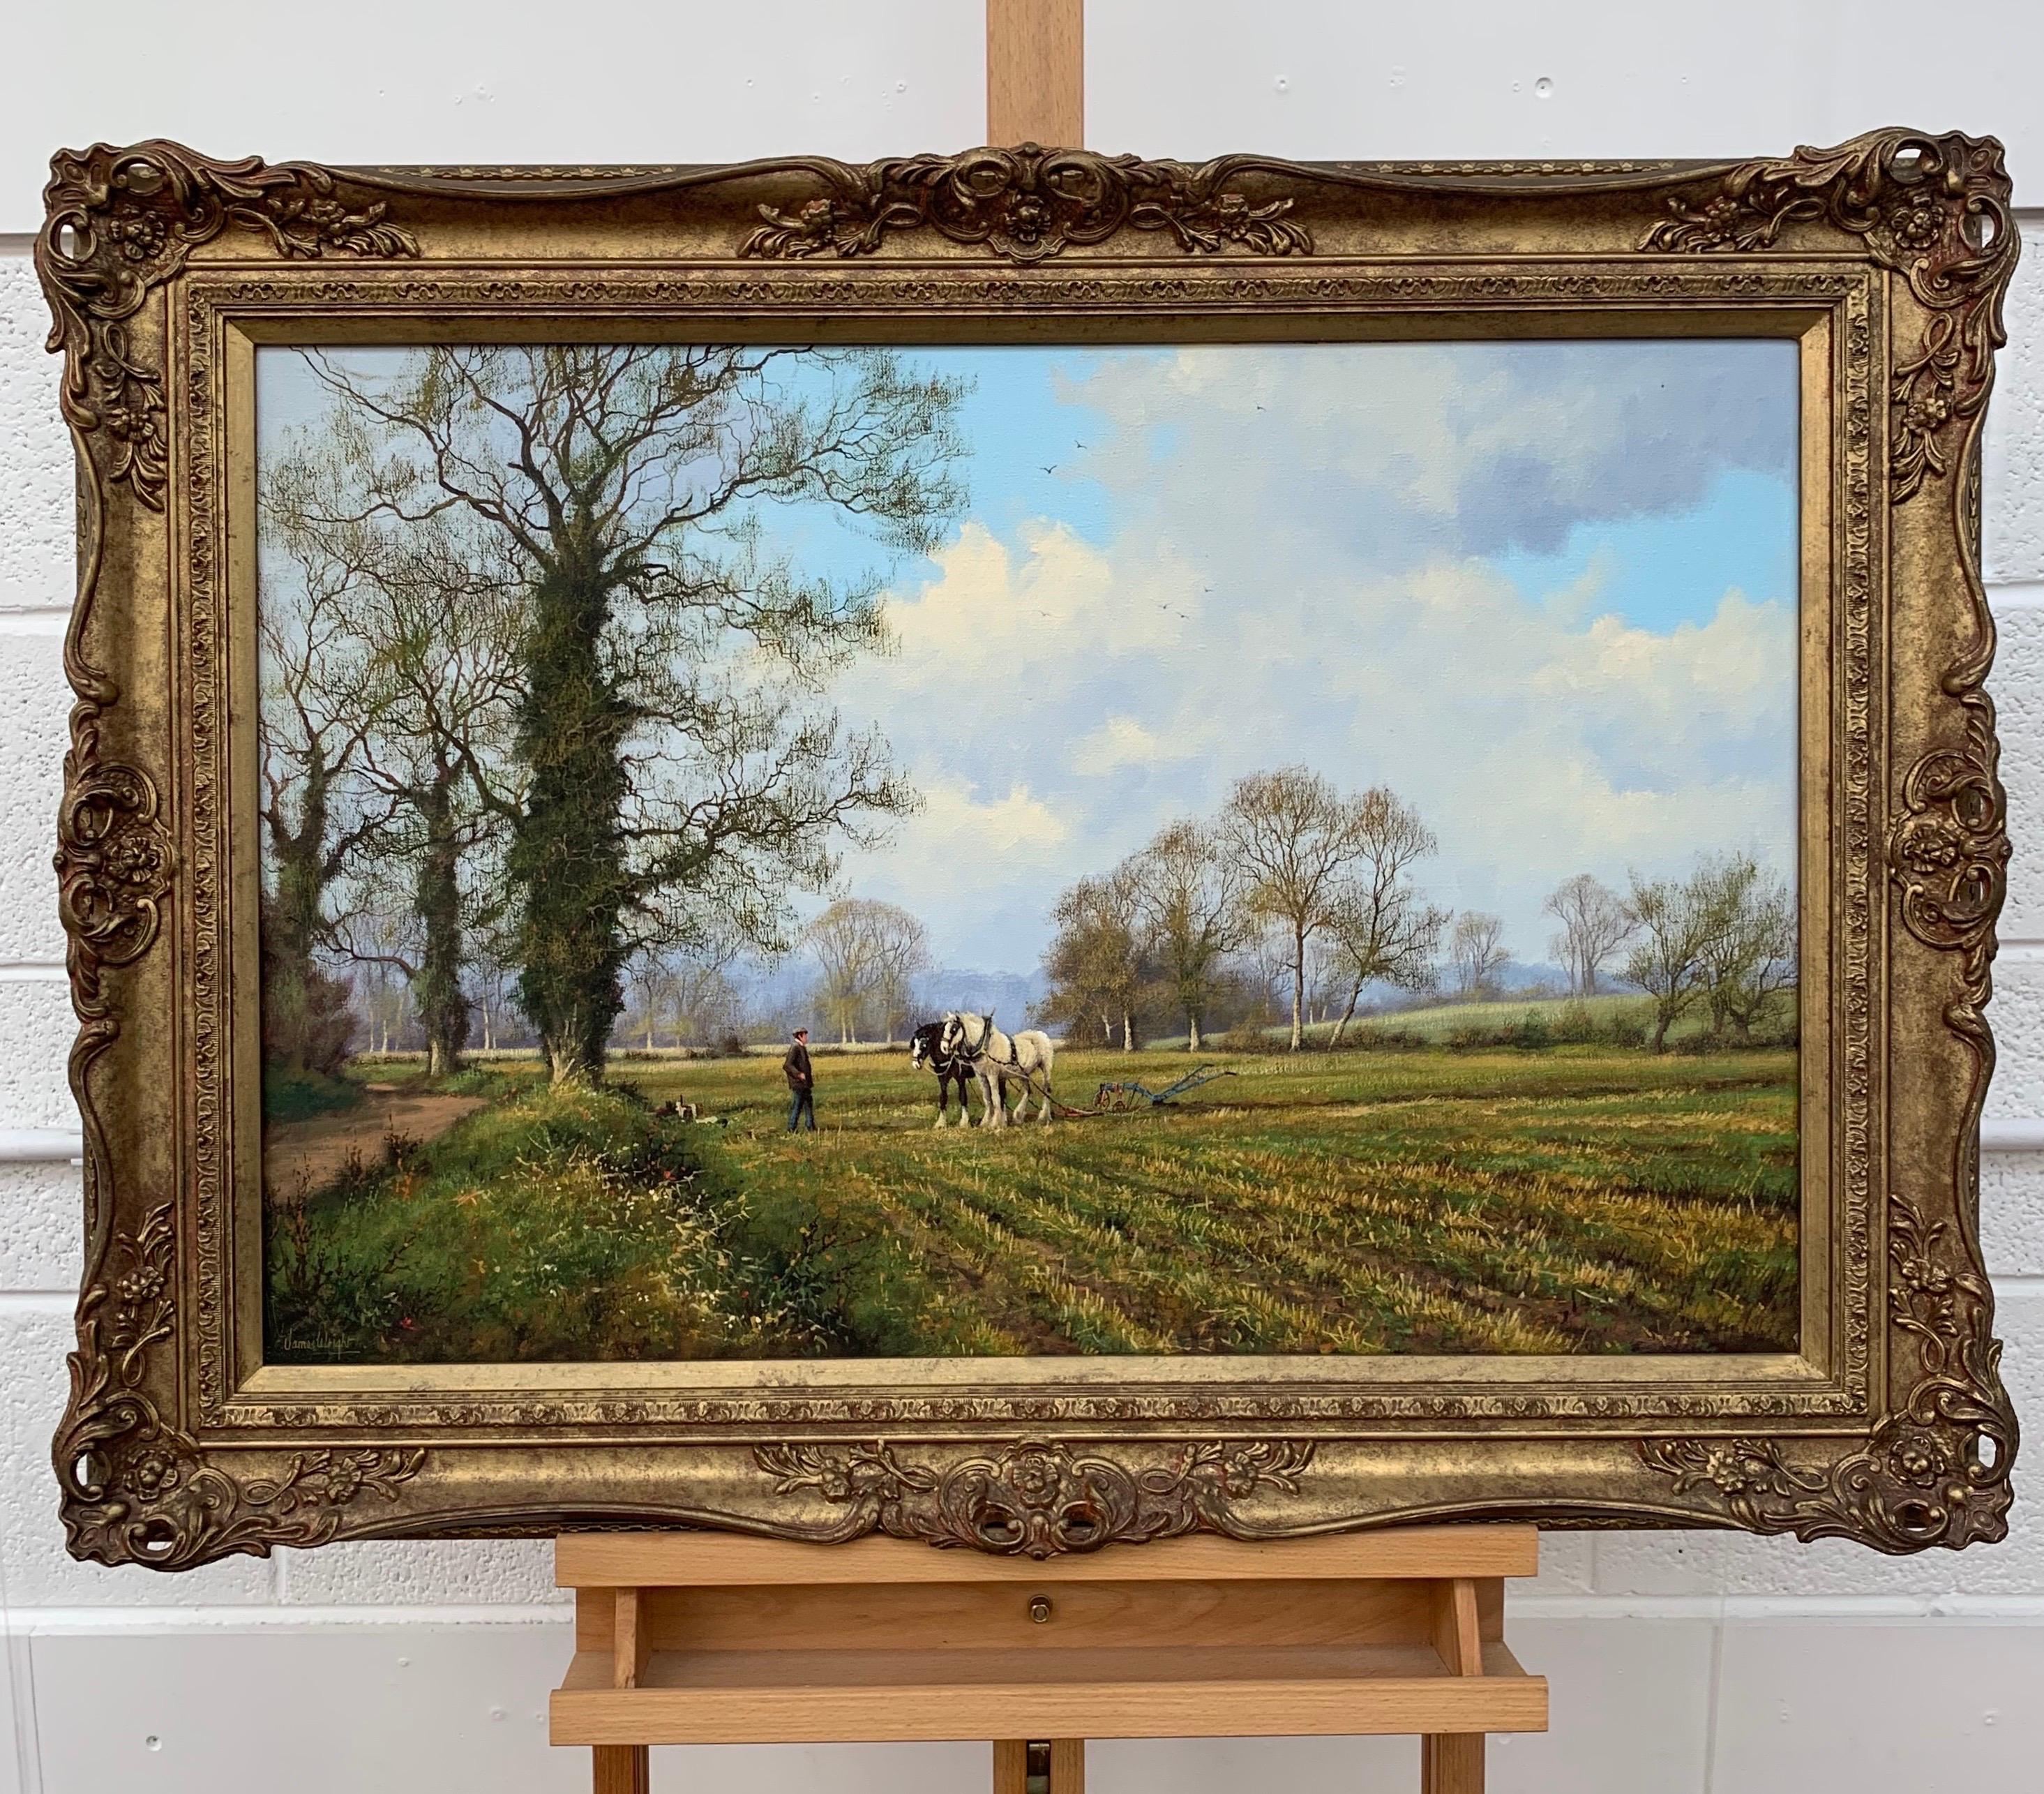 Traditional Oil Painting of the English Countryside with Horses by Modern British Artist

Art measures 30 x 20 inches
Frame measures 36 x 26 inches 

James Wright was born in Peterborough in 1935 and now lives in Lincolnshire. James is a self-taught